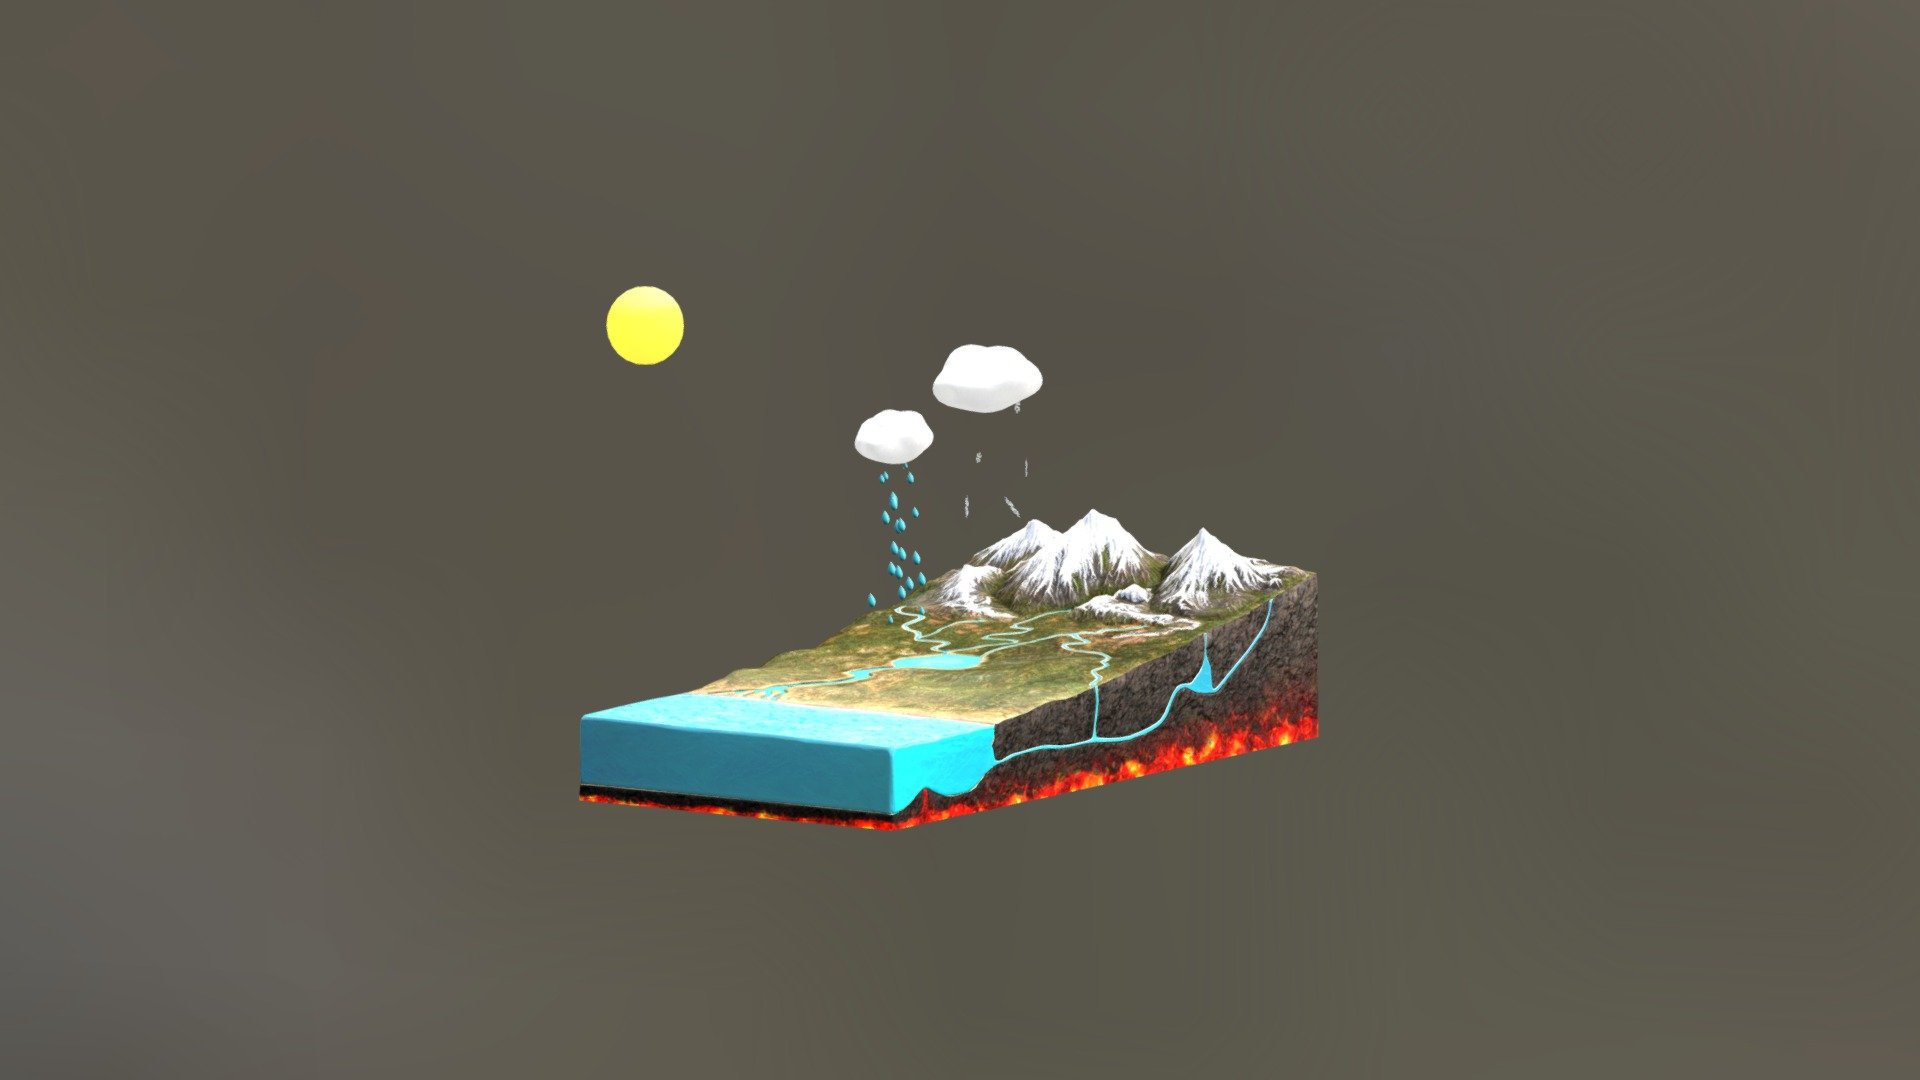 Downloaded from Microsoft 3d viewer
2 animations
Rigged
https://www.youtube.com/watch?v=NNC0kIzM1Fo - Diorama Ciclo Del Agua (animated) - Download Free 3D model by vmmaniac 3d model